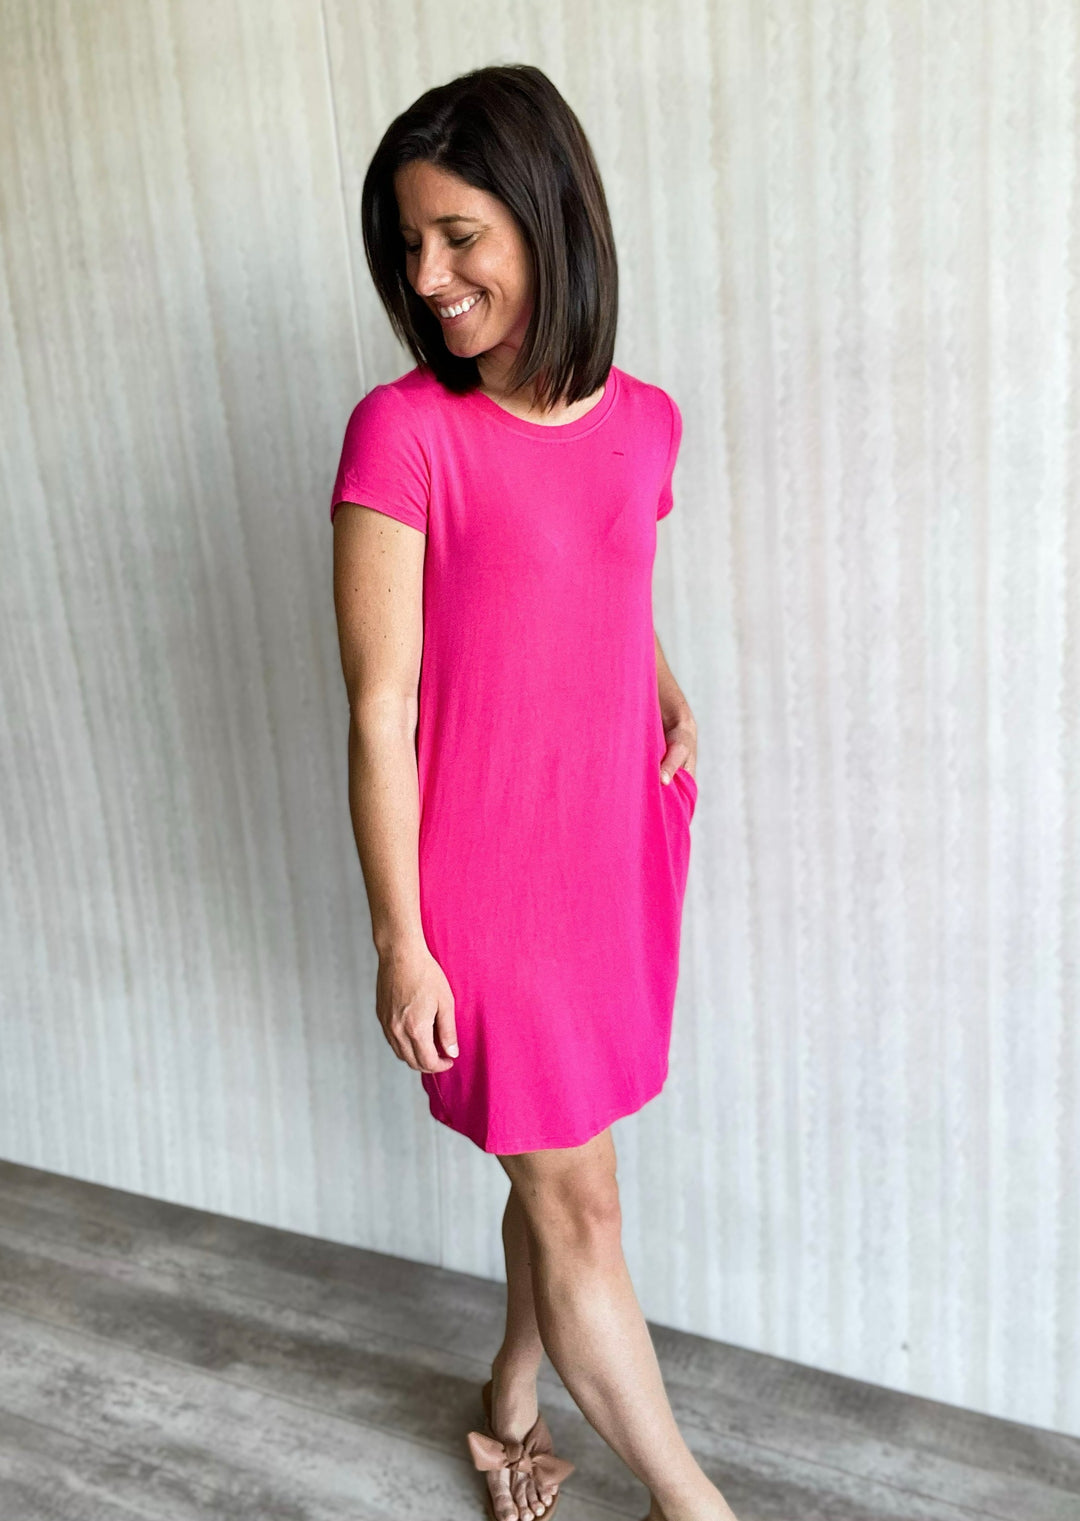 Hot Pink T-Shirt Dress with Pockets | Comfortable and casual summer dresses